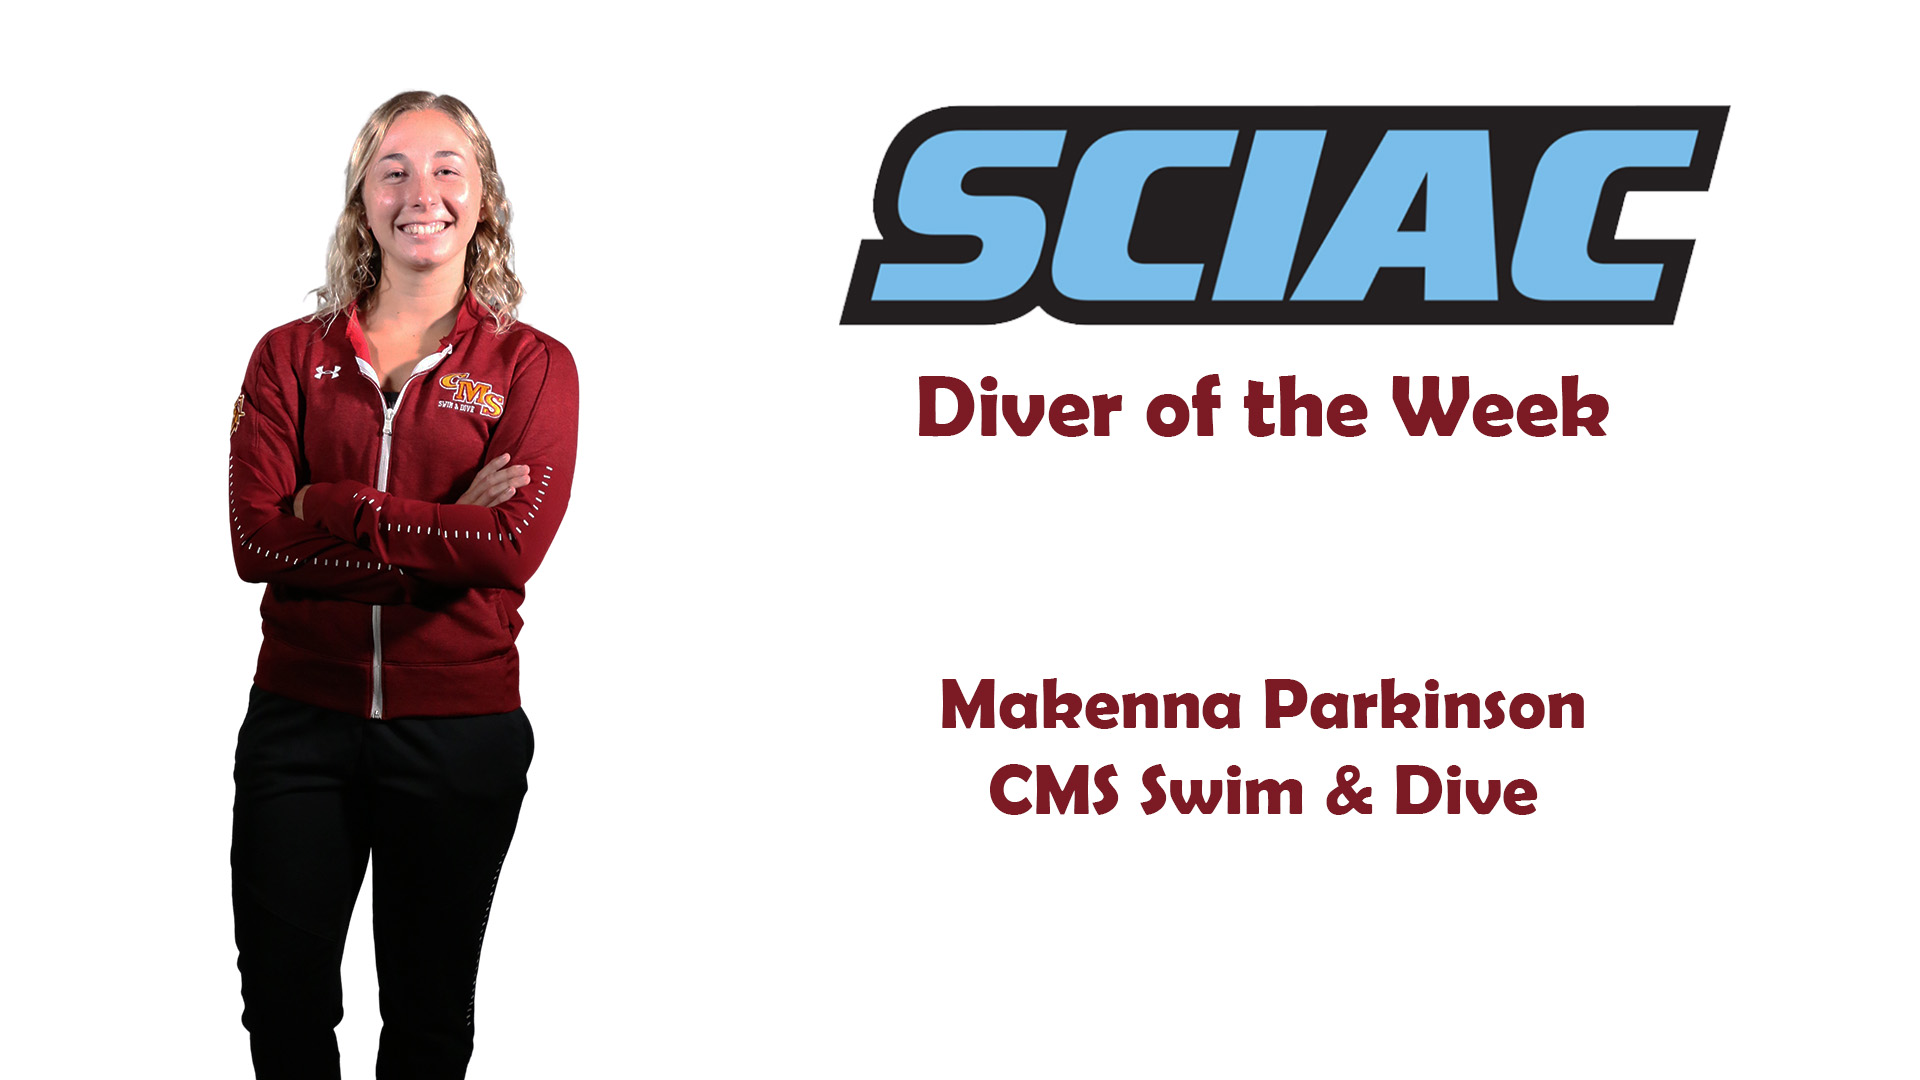 Posed shot of Makenna Parkinson with the SCIAC logo